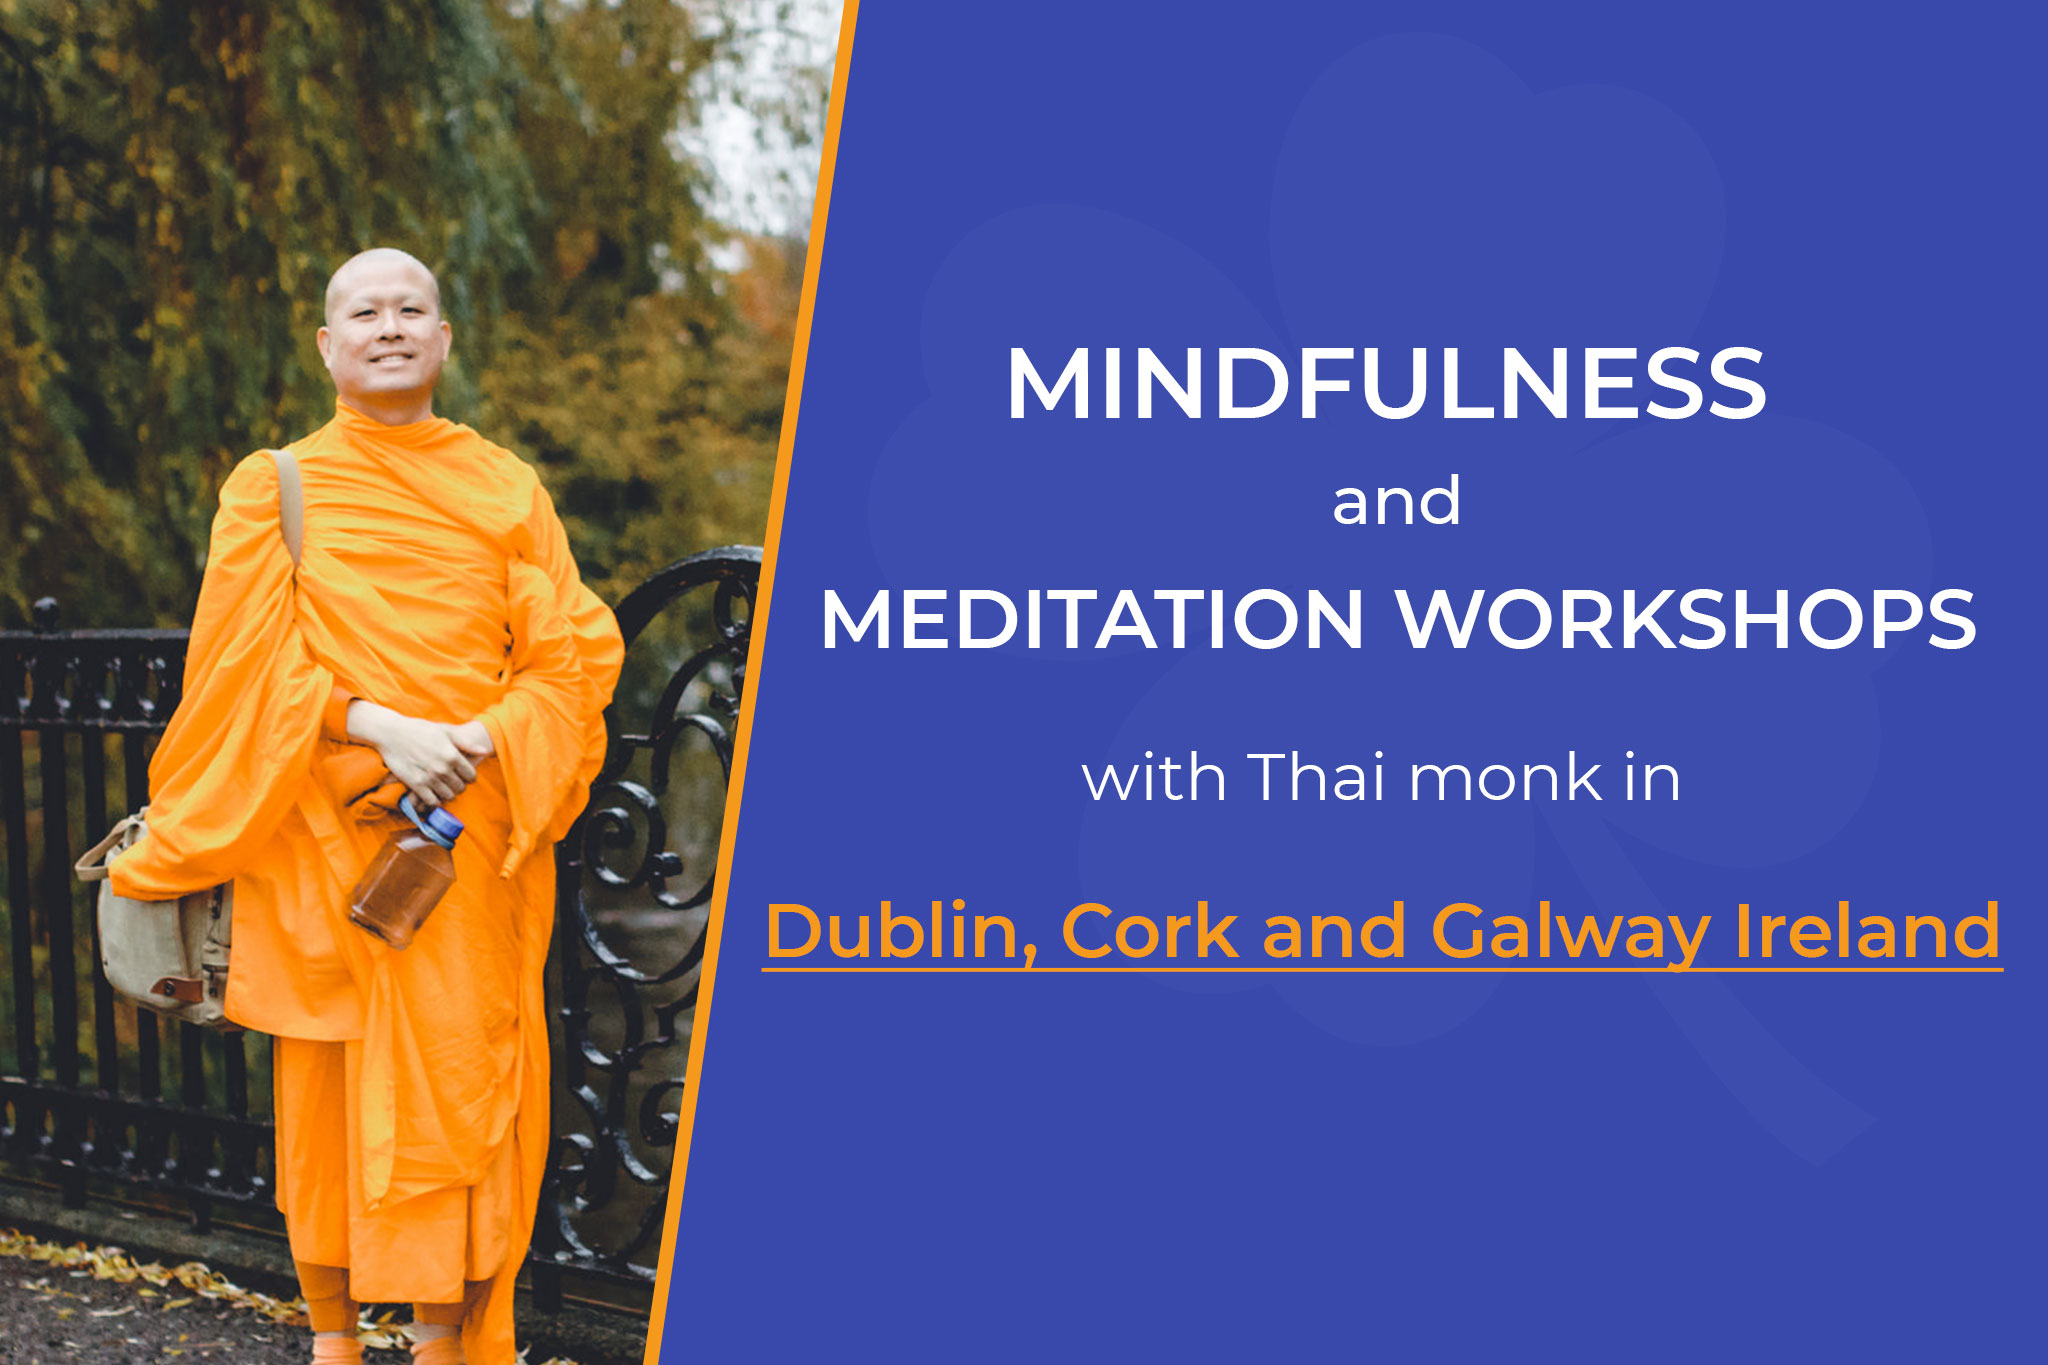 image from Mindfulness and meditation workshops with Thai monk in Dublin, Cork and Galway Ireland